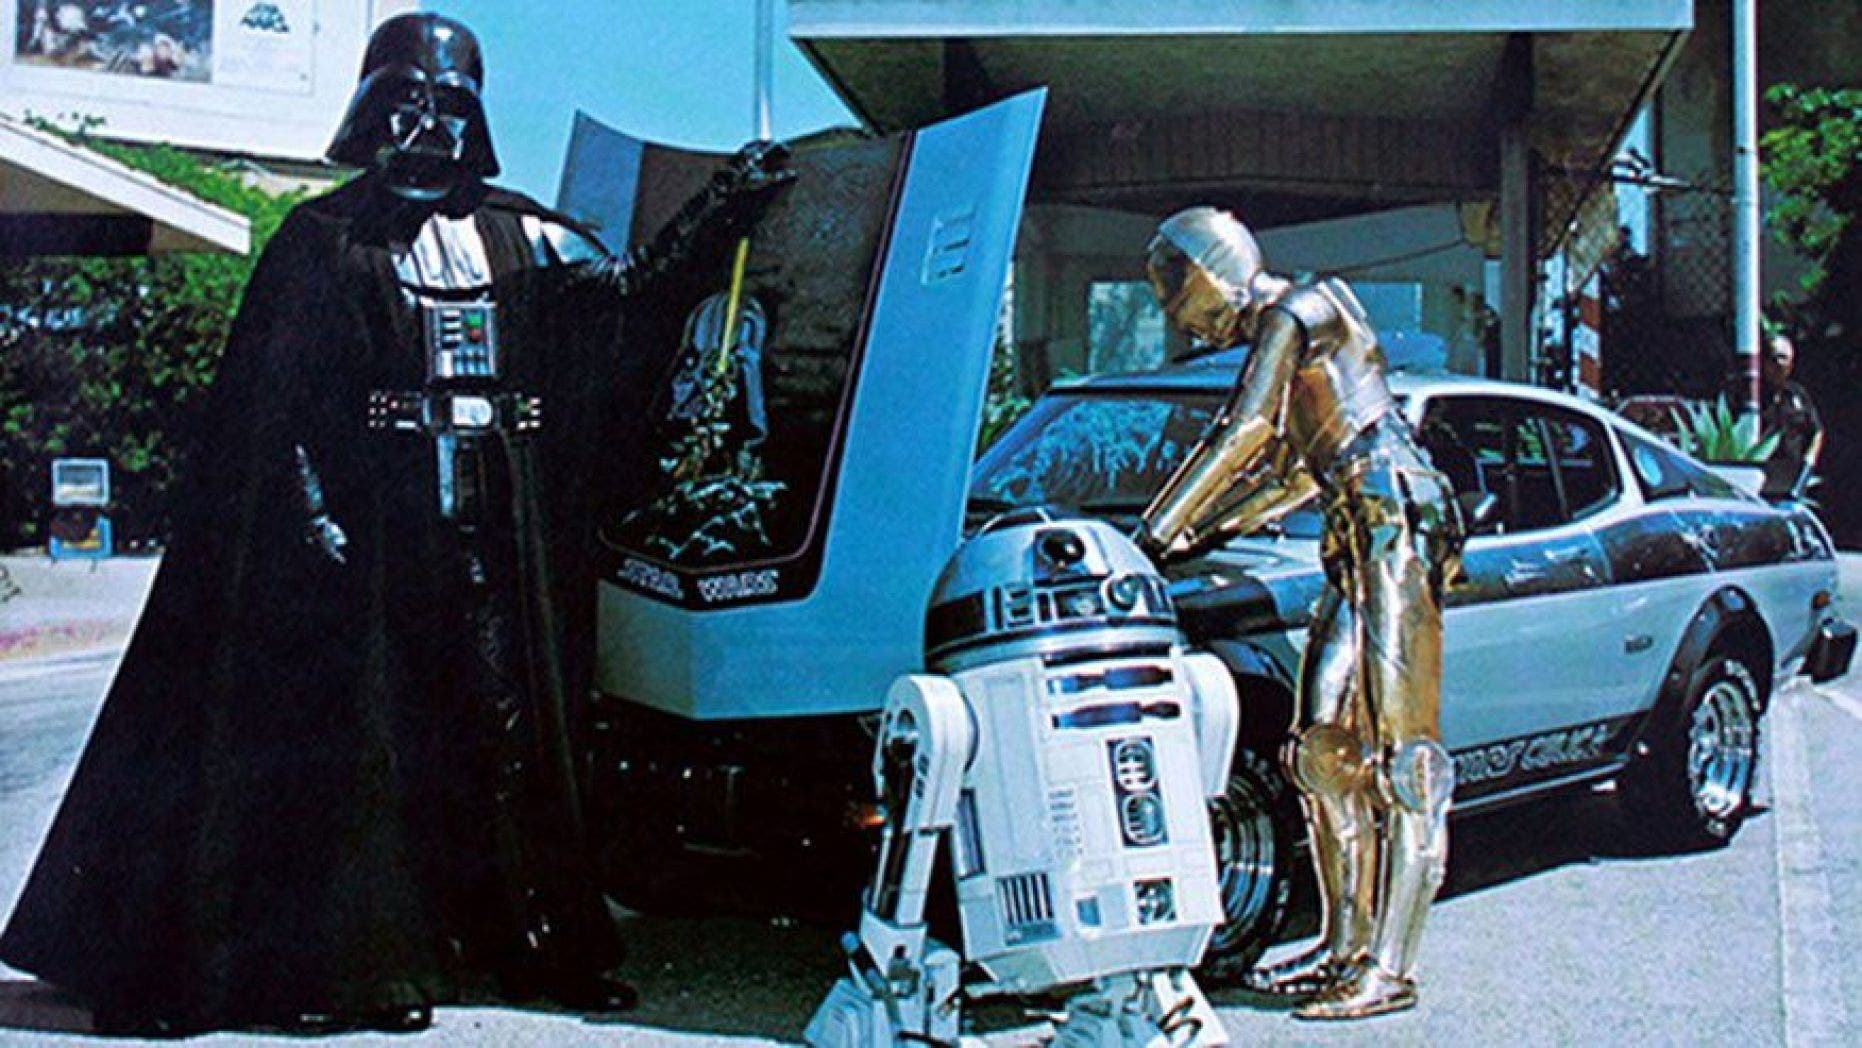 Where is the missing Star Wars Toyota Celica?